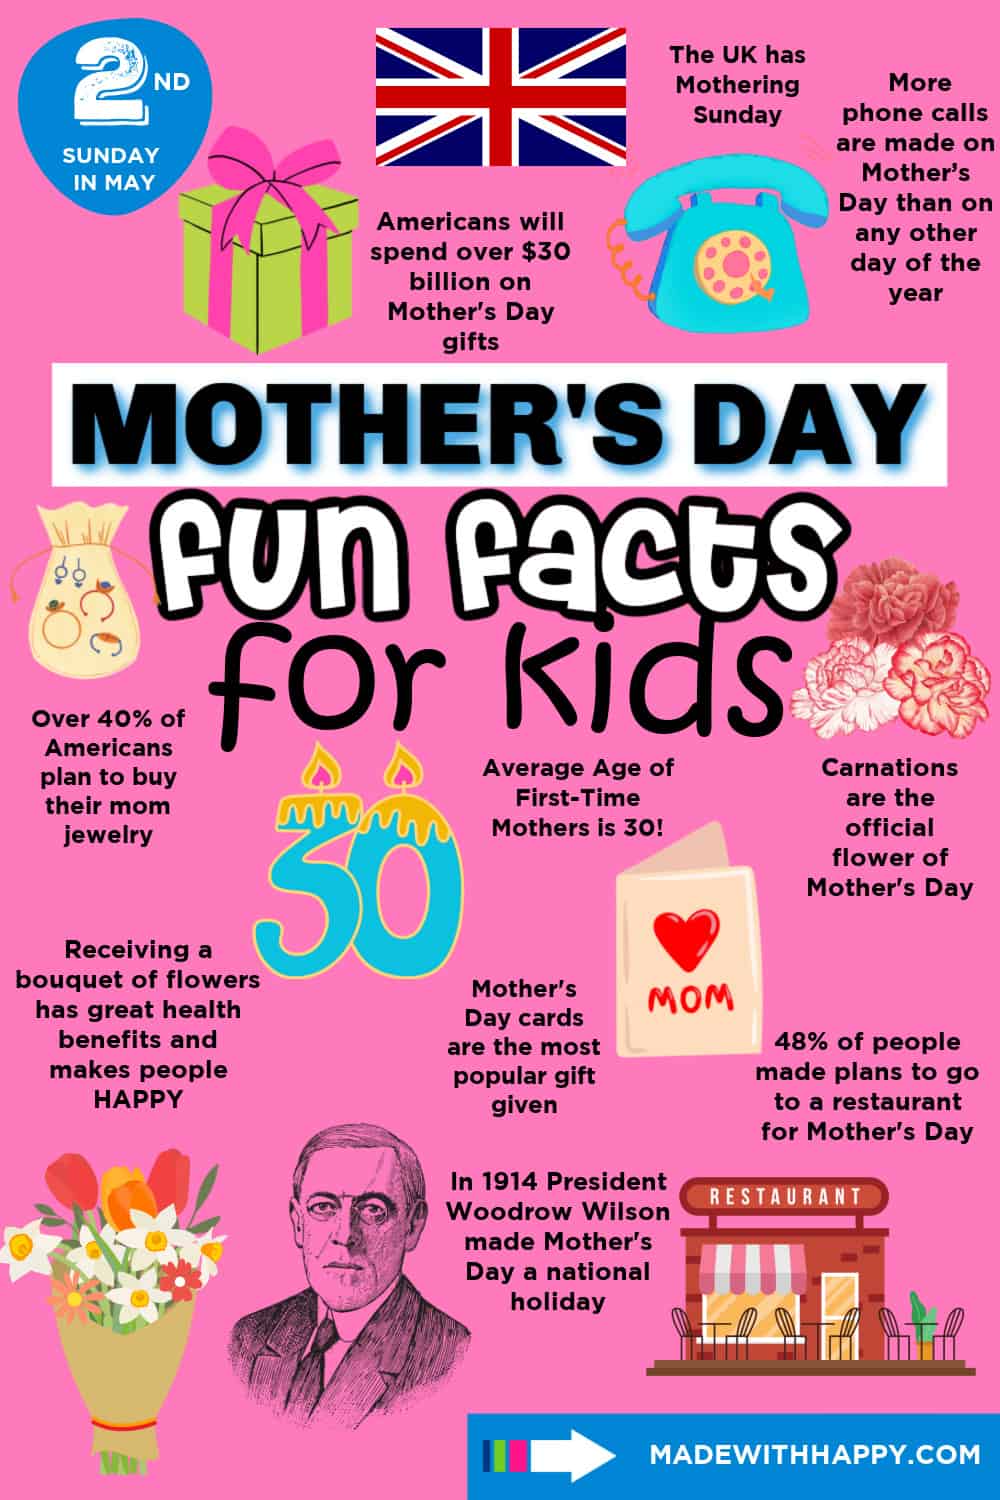 https://www.madewithhappy.com/wp-content/uploads/mothers-day-facts.jpg